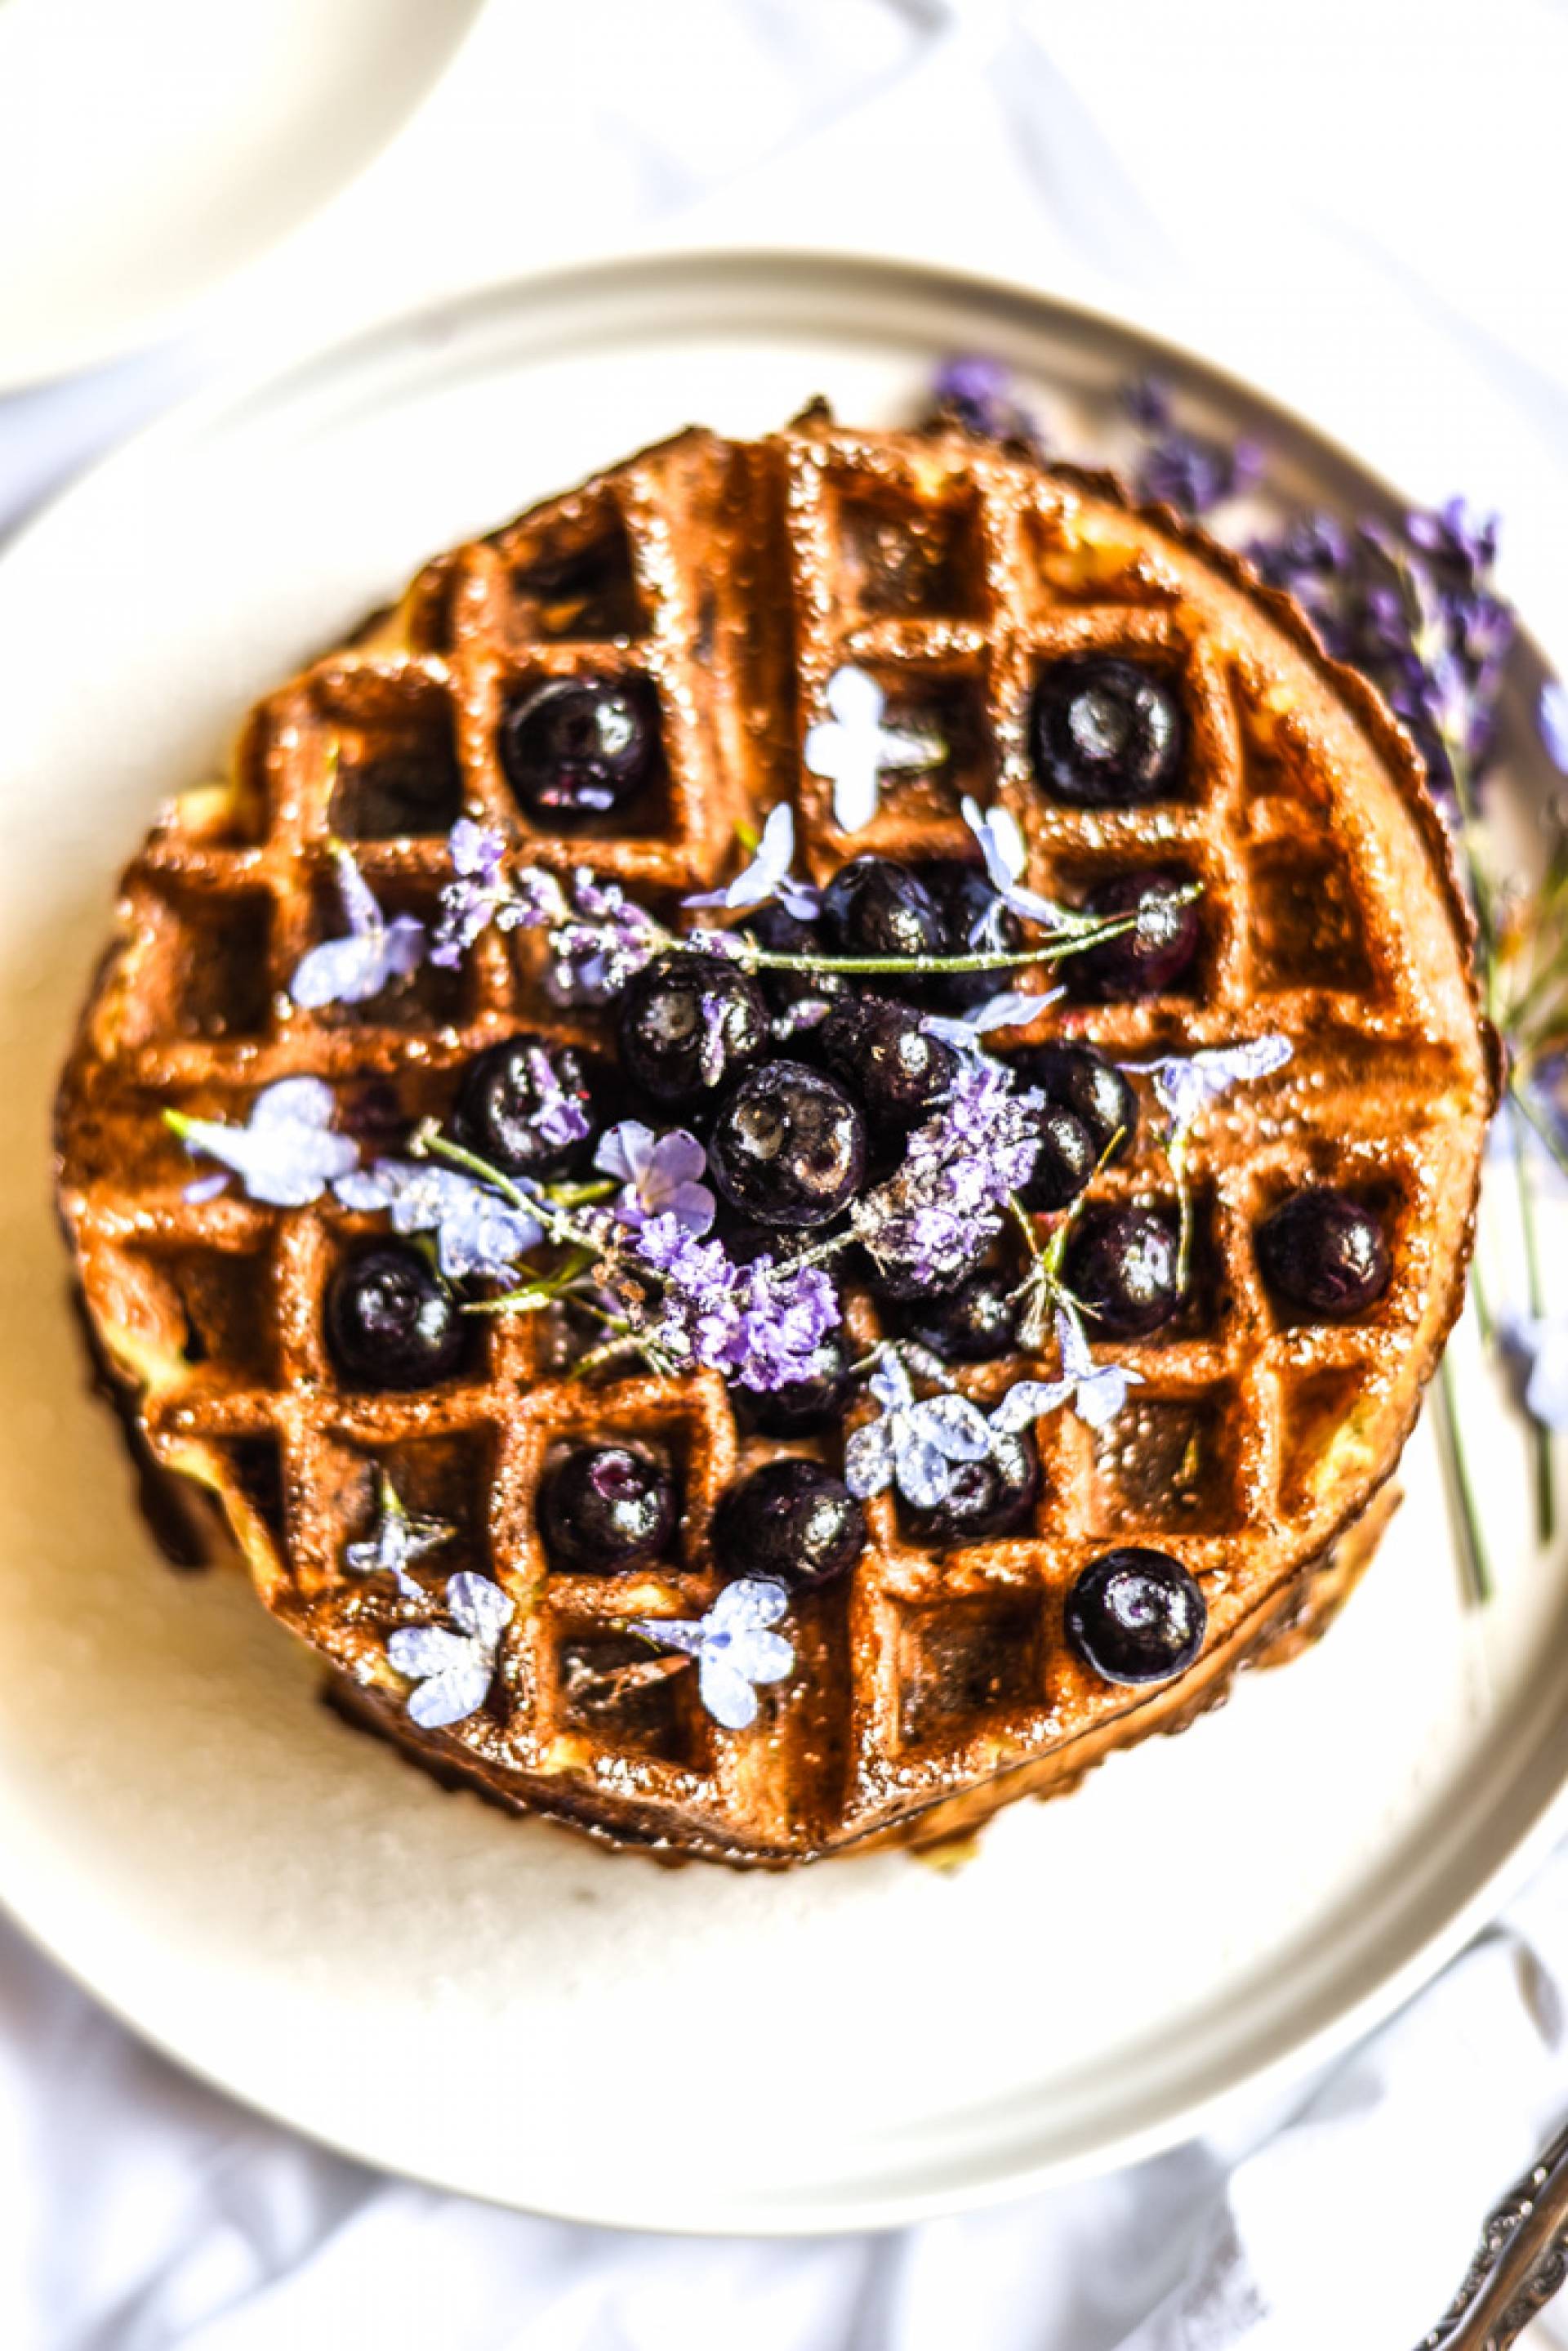 Lavender waffles + macadamia & cashe butter